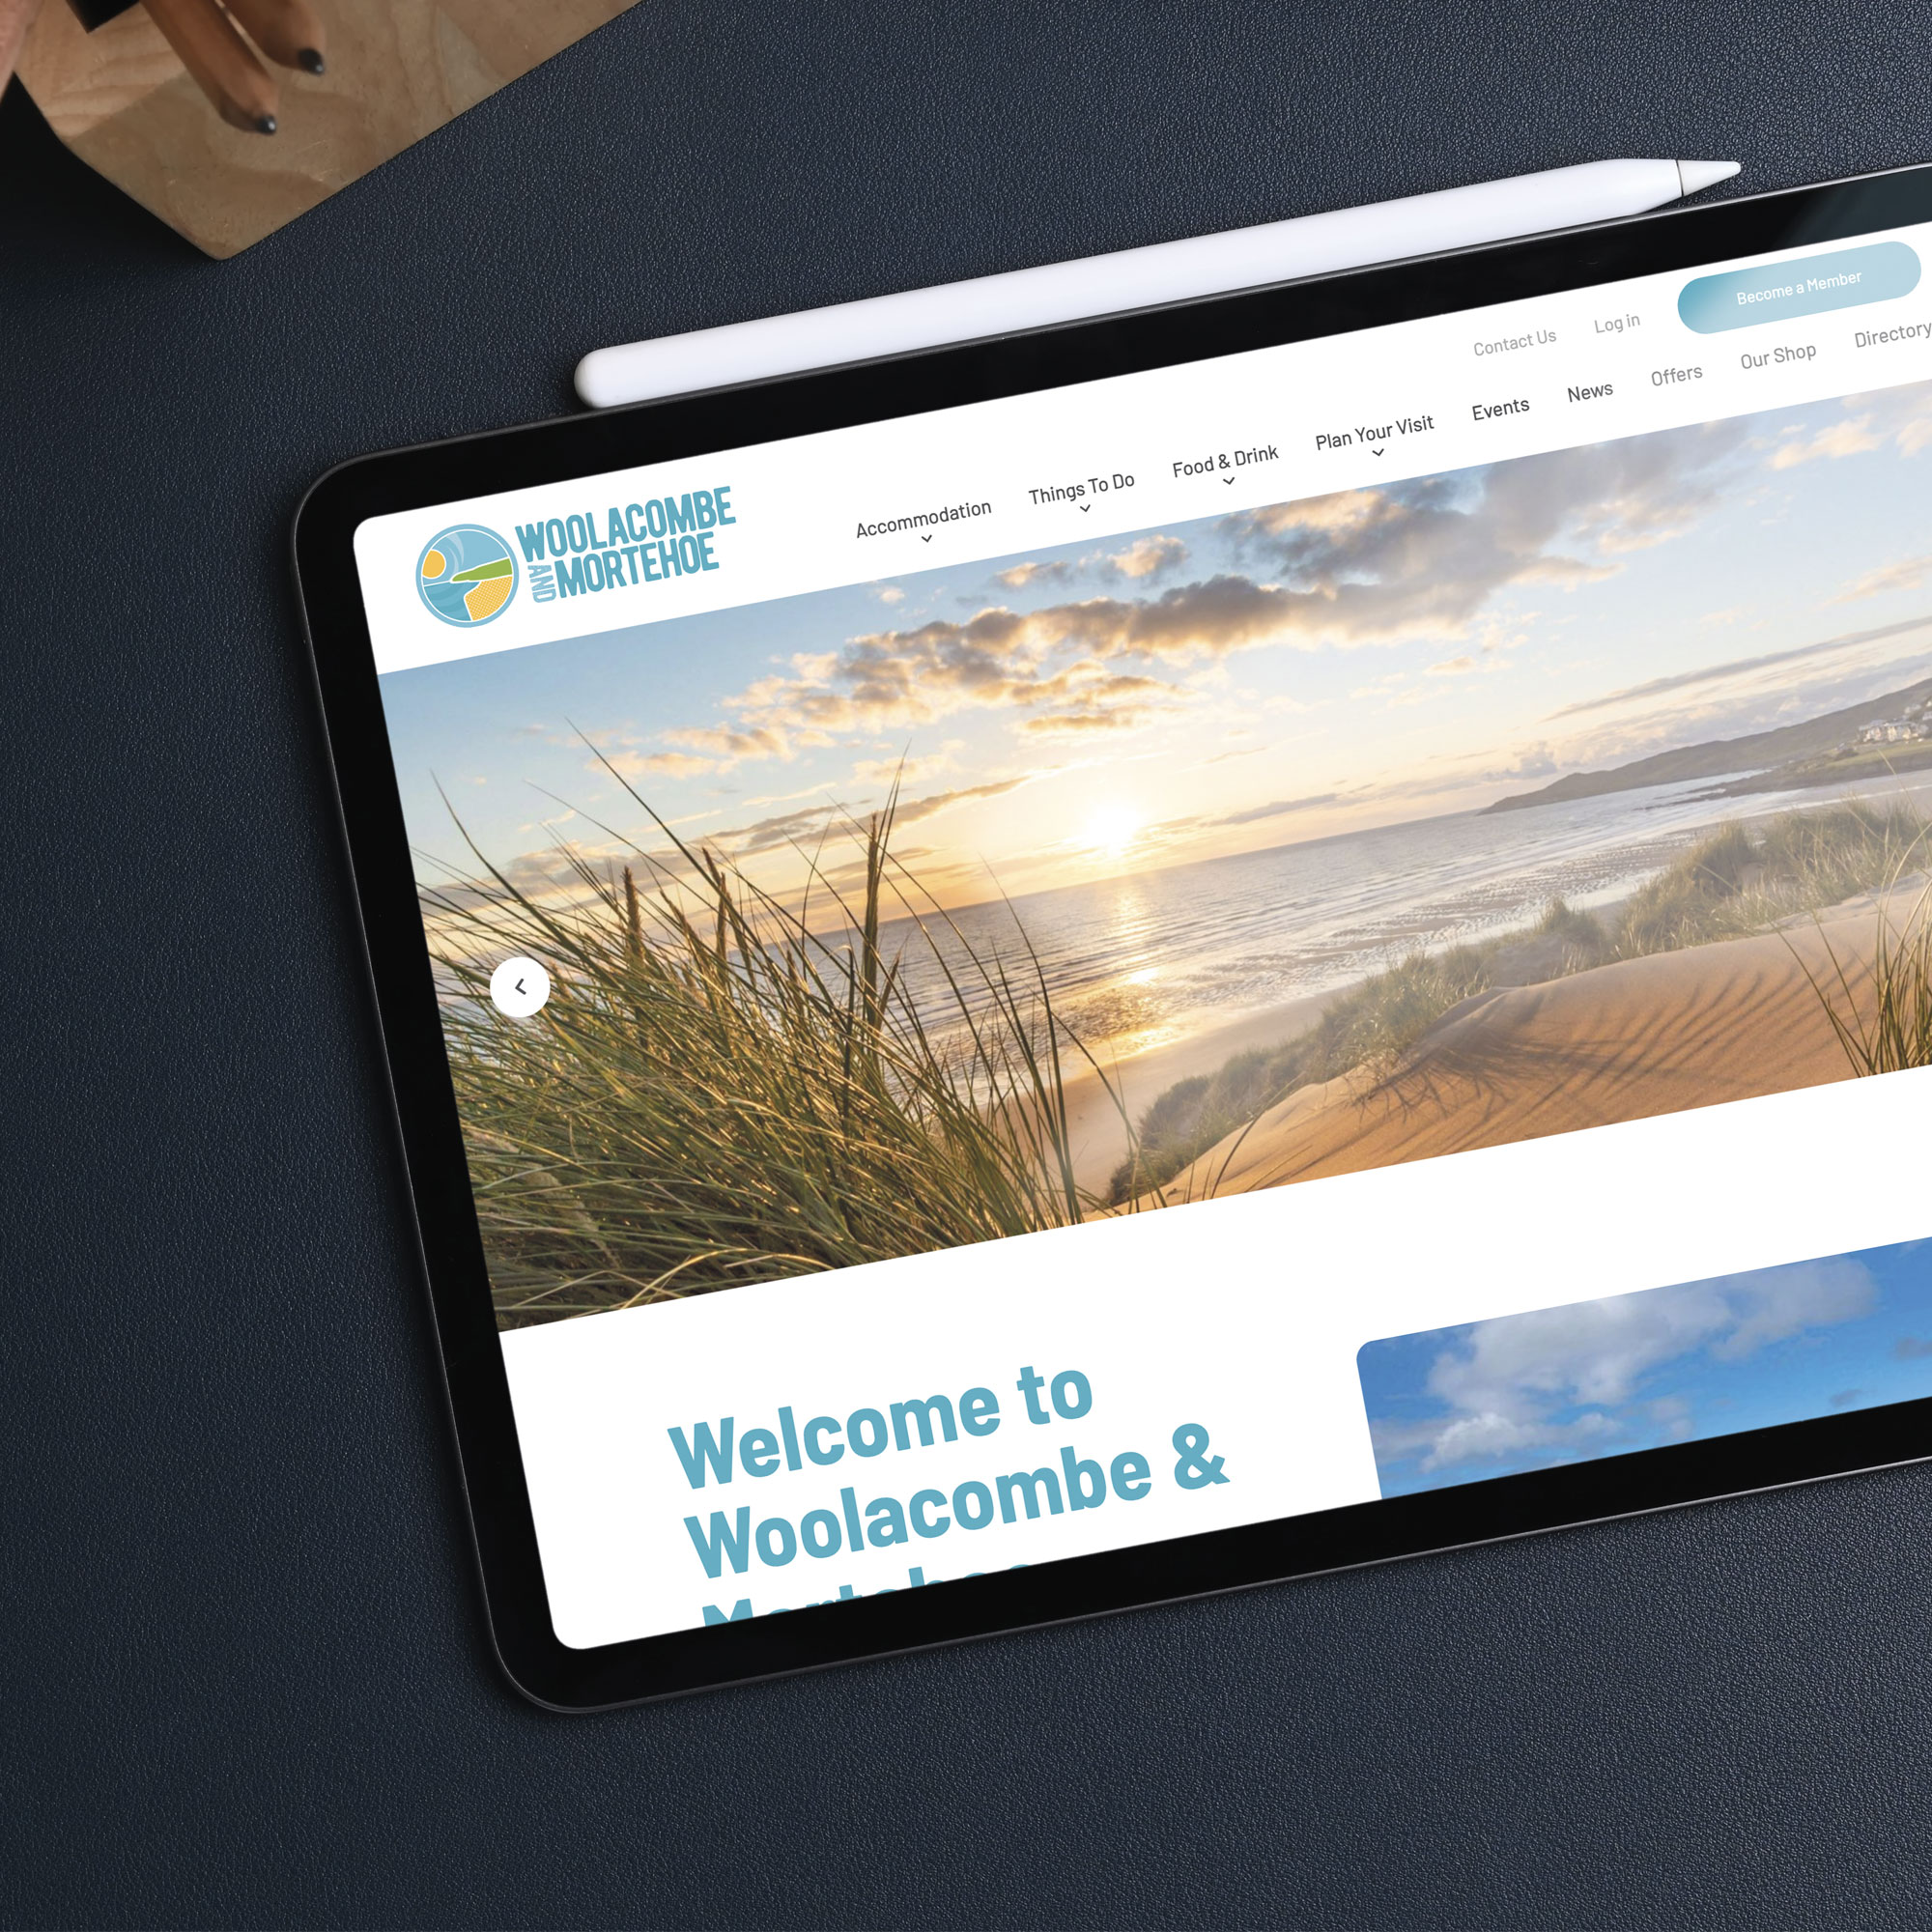 Woolacombe Tourist Information Centre bespoke website design and development by Inventive